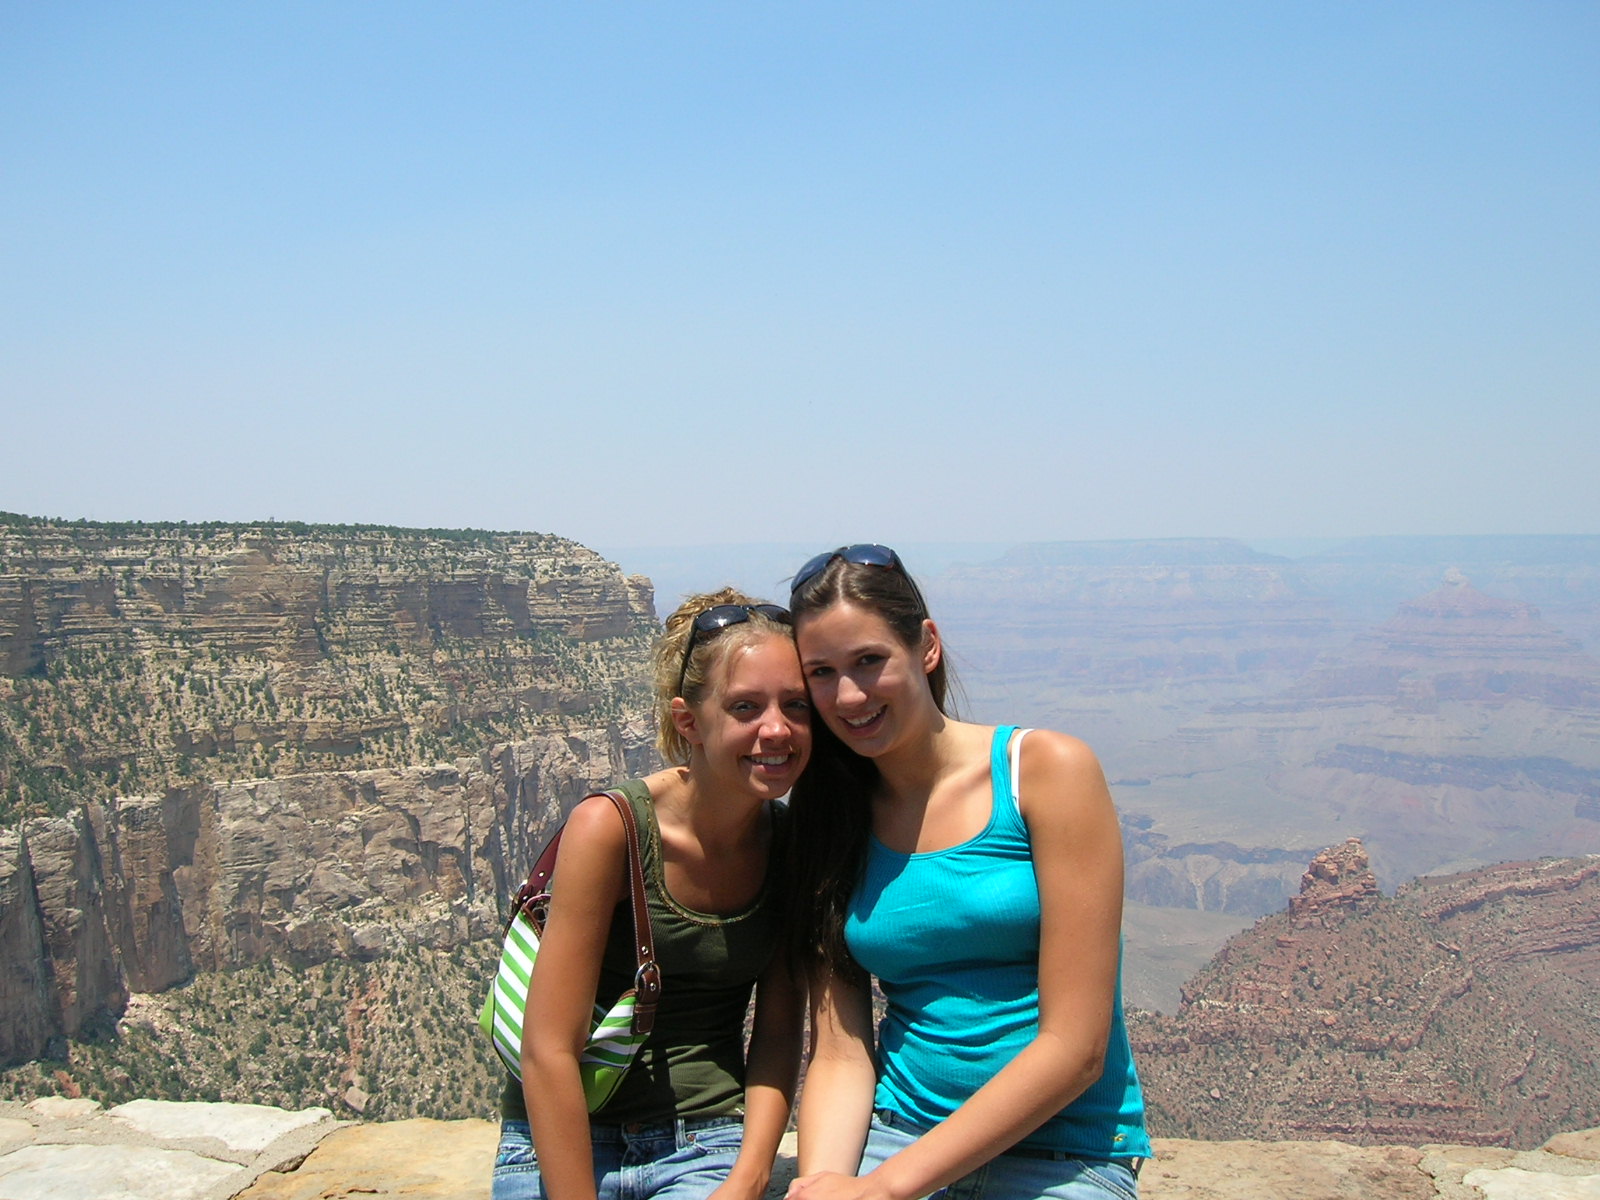 My Daughter and her friend at the Grand Canyon